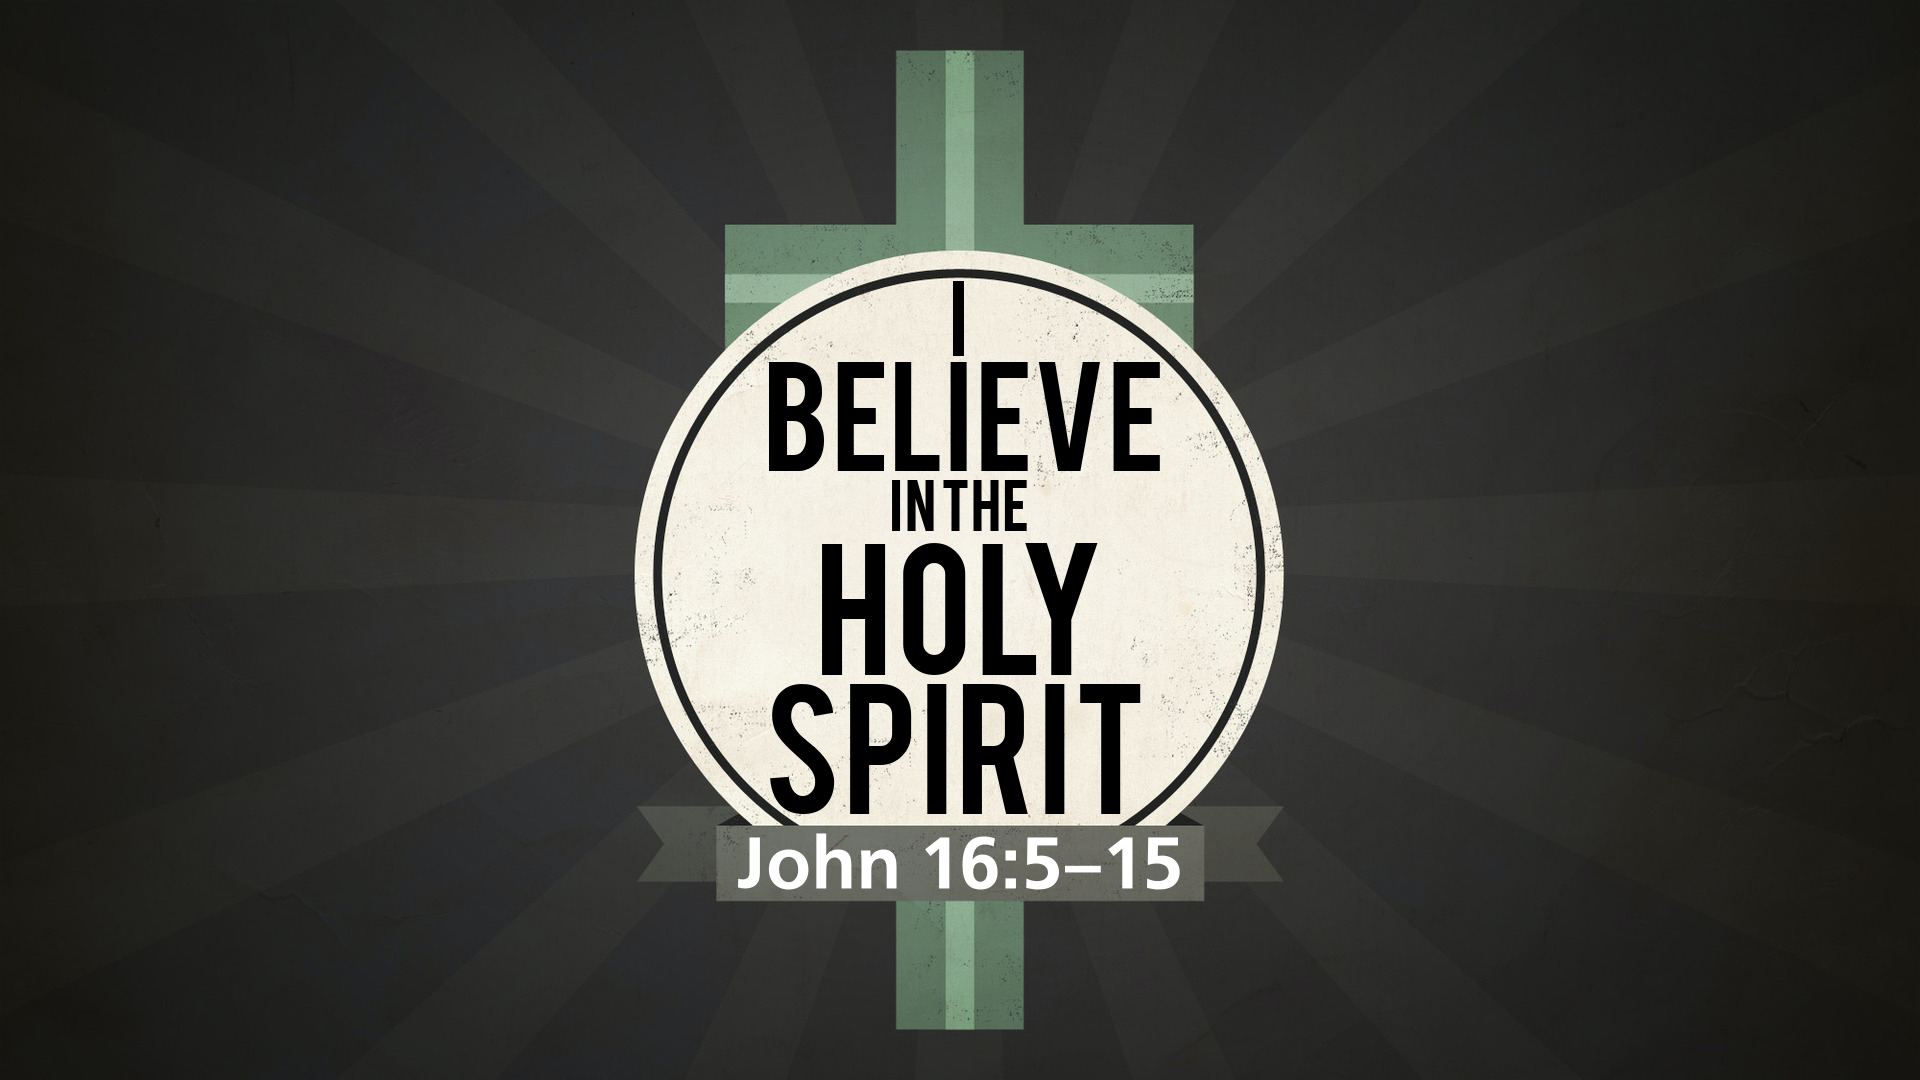 "I Believe In The Holy Spirit"